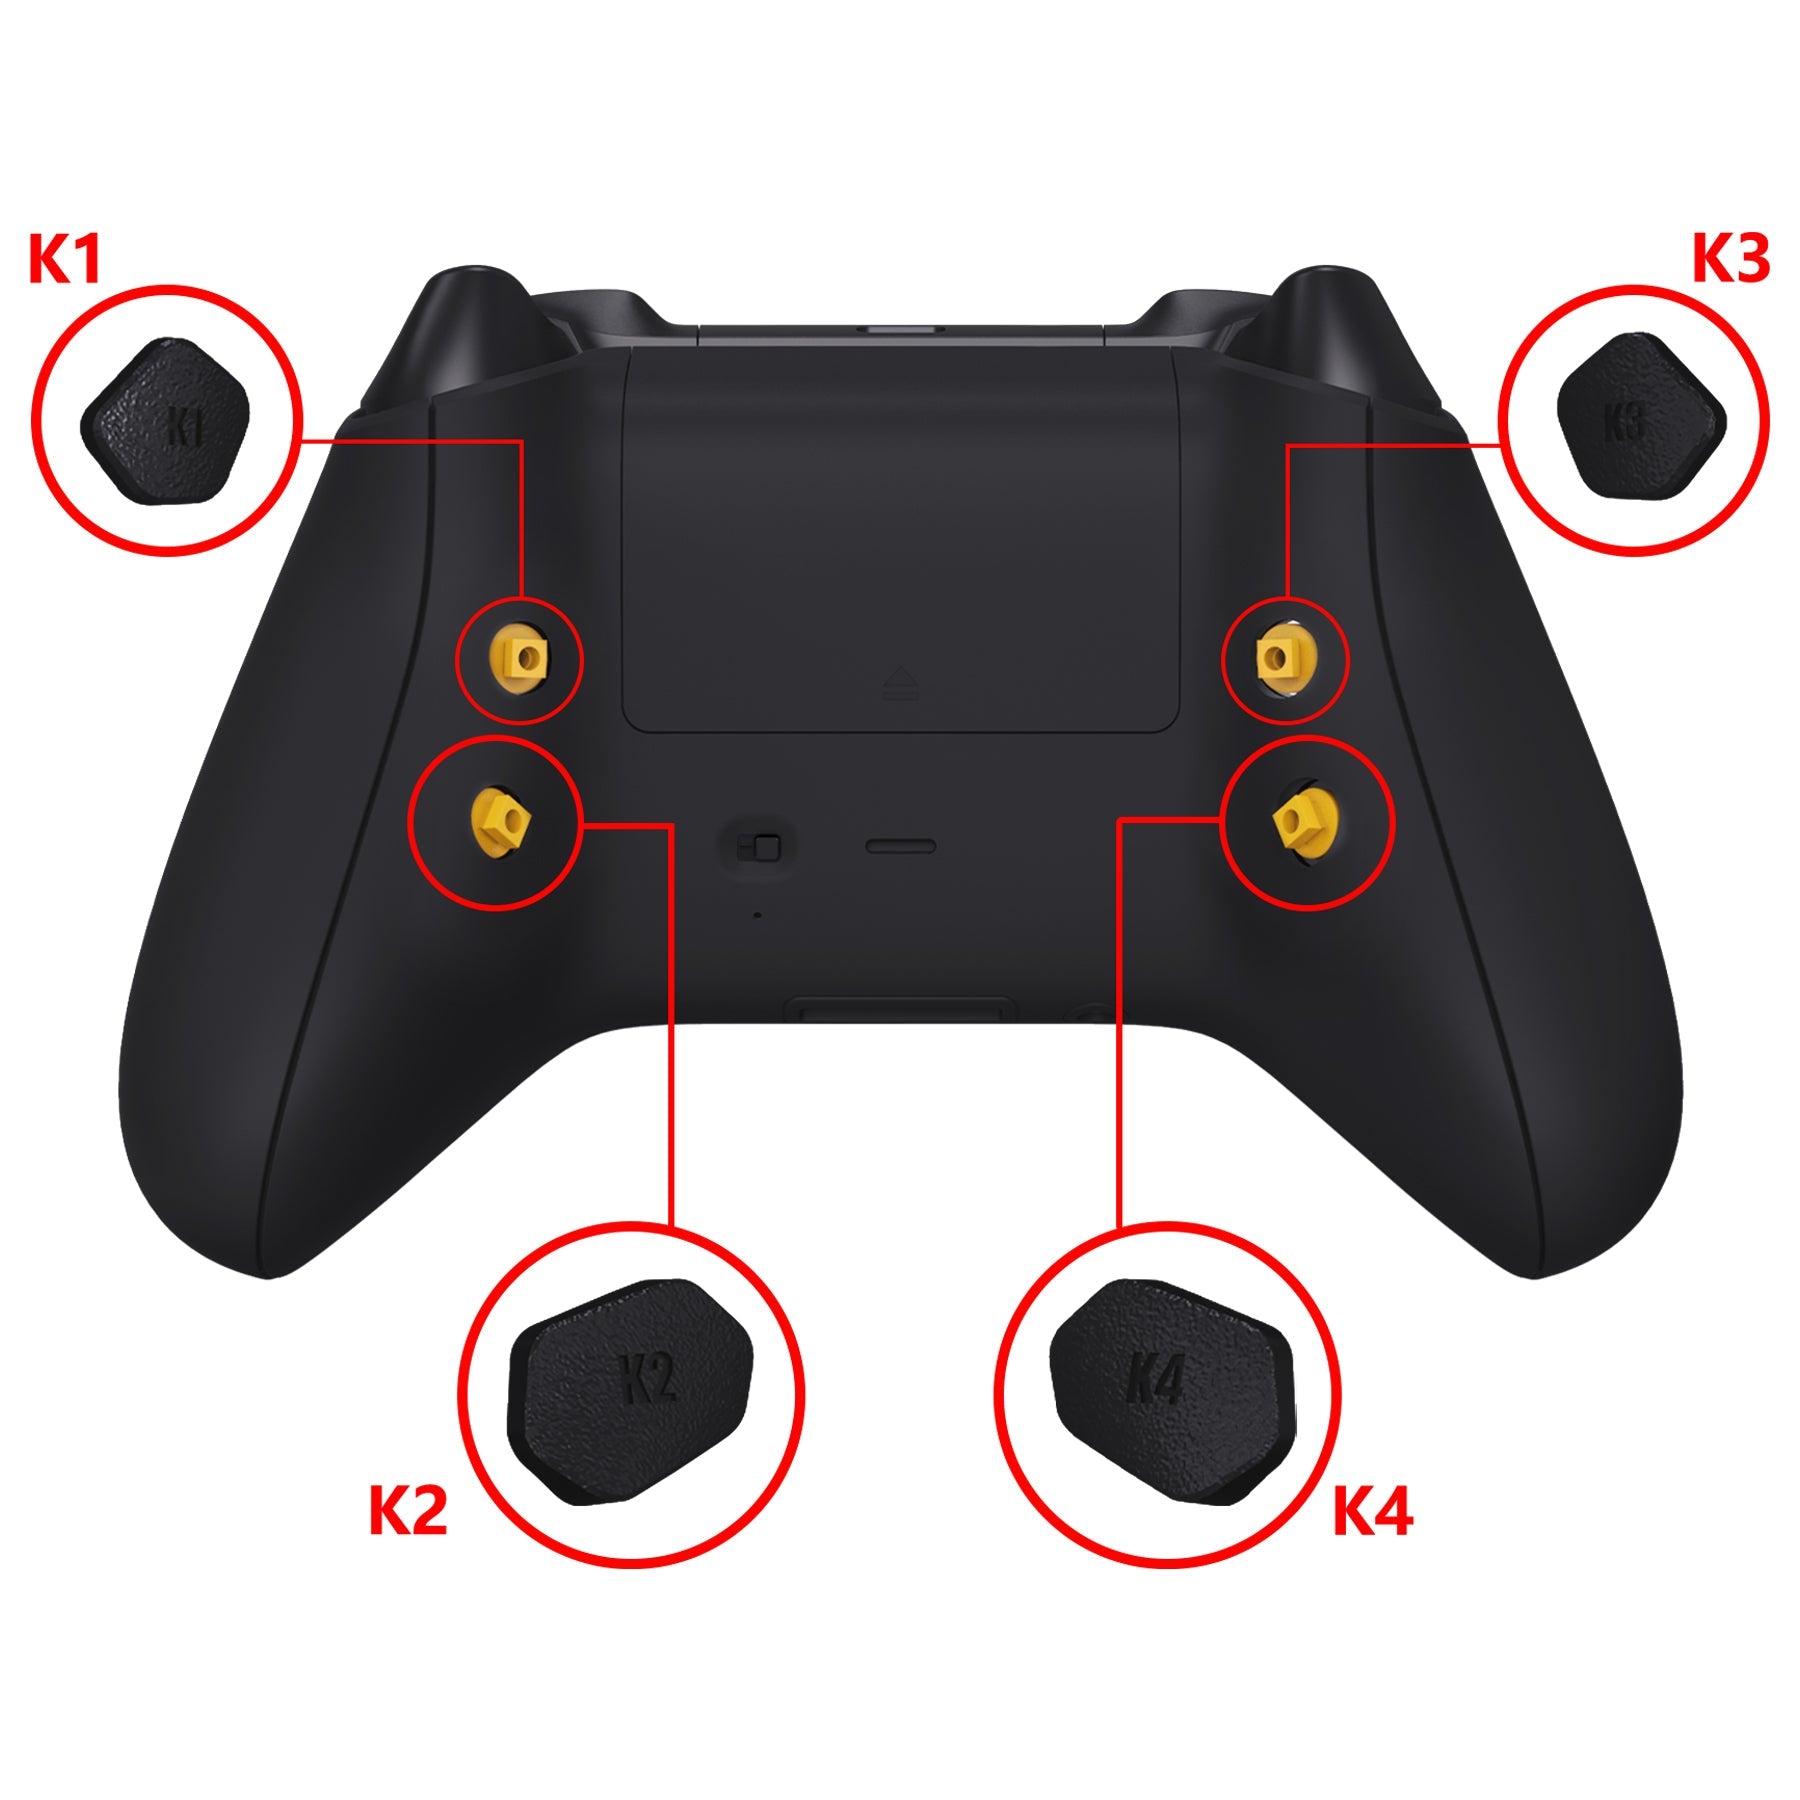 Solid Black Replacement Redesigned K1 K2 K3 K4 Back Buttons & Setting Button for Xbox One S/X, Xbox Series X/S Controller eXtremeRate Victor S/X Remap